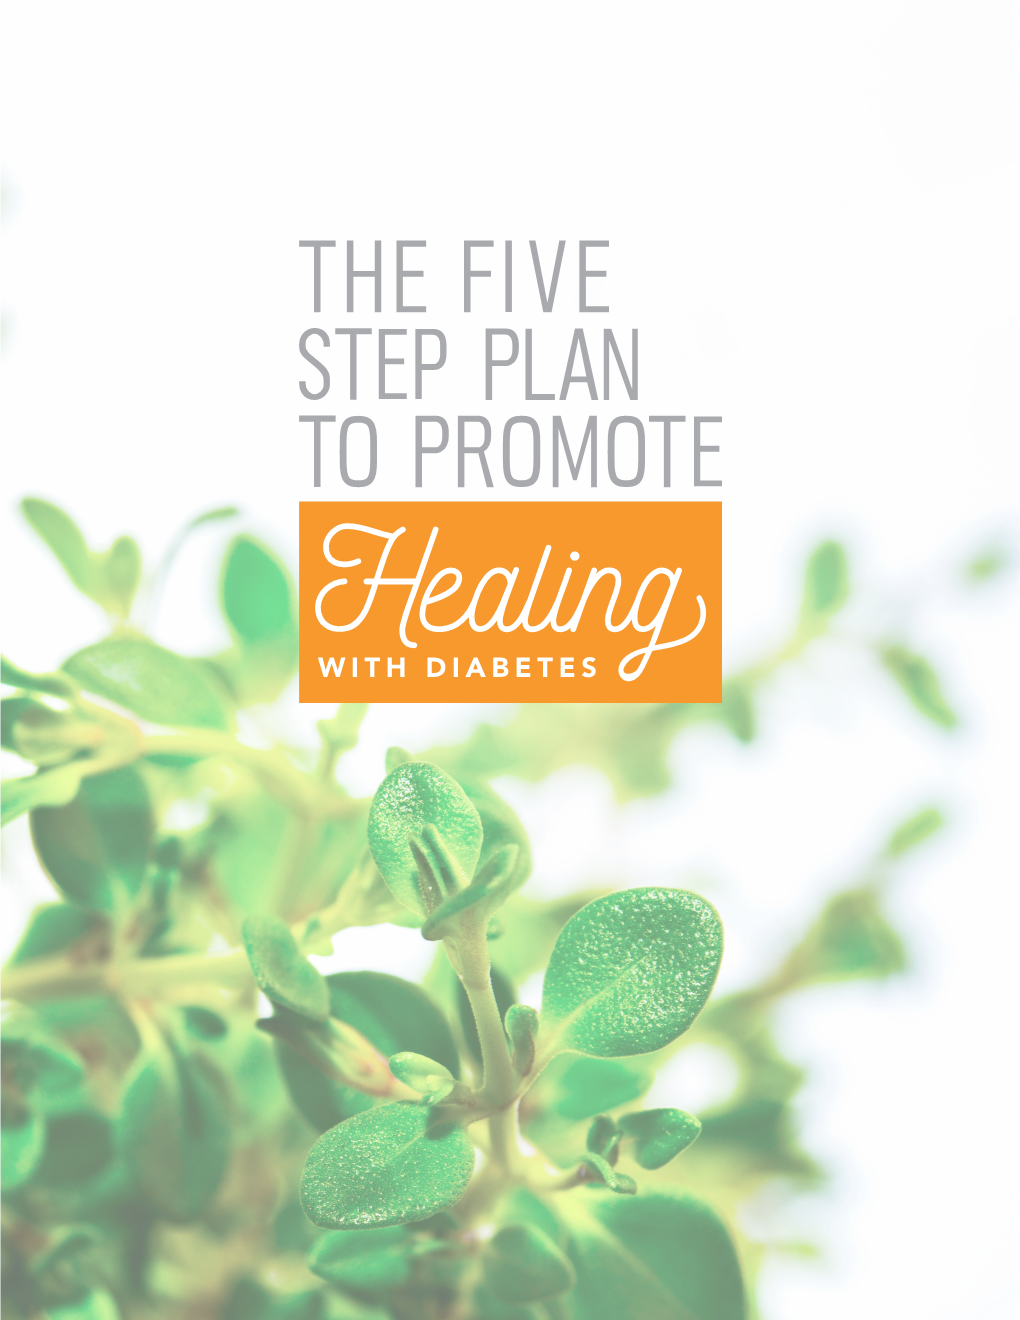 The Five Step Plan to Promote Healing with Diabetes